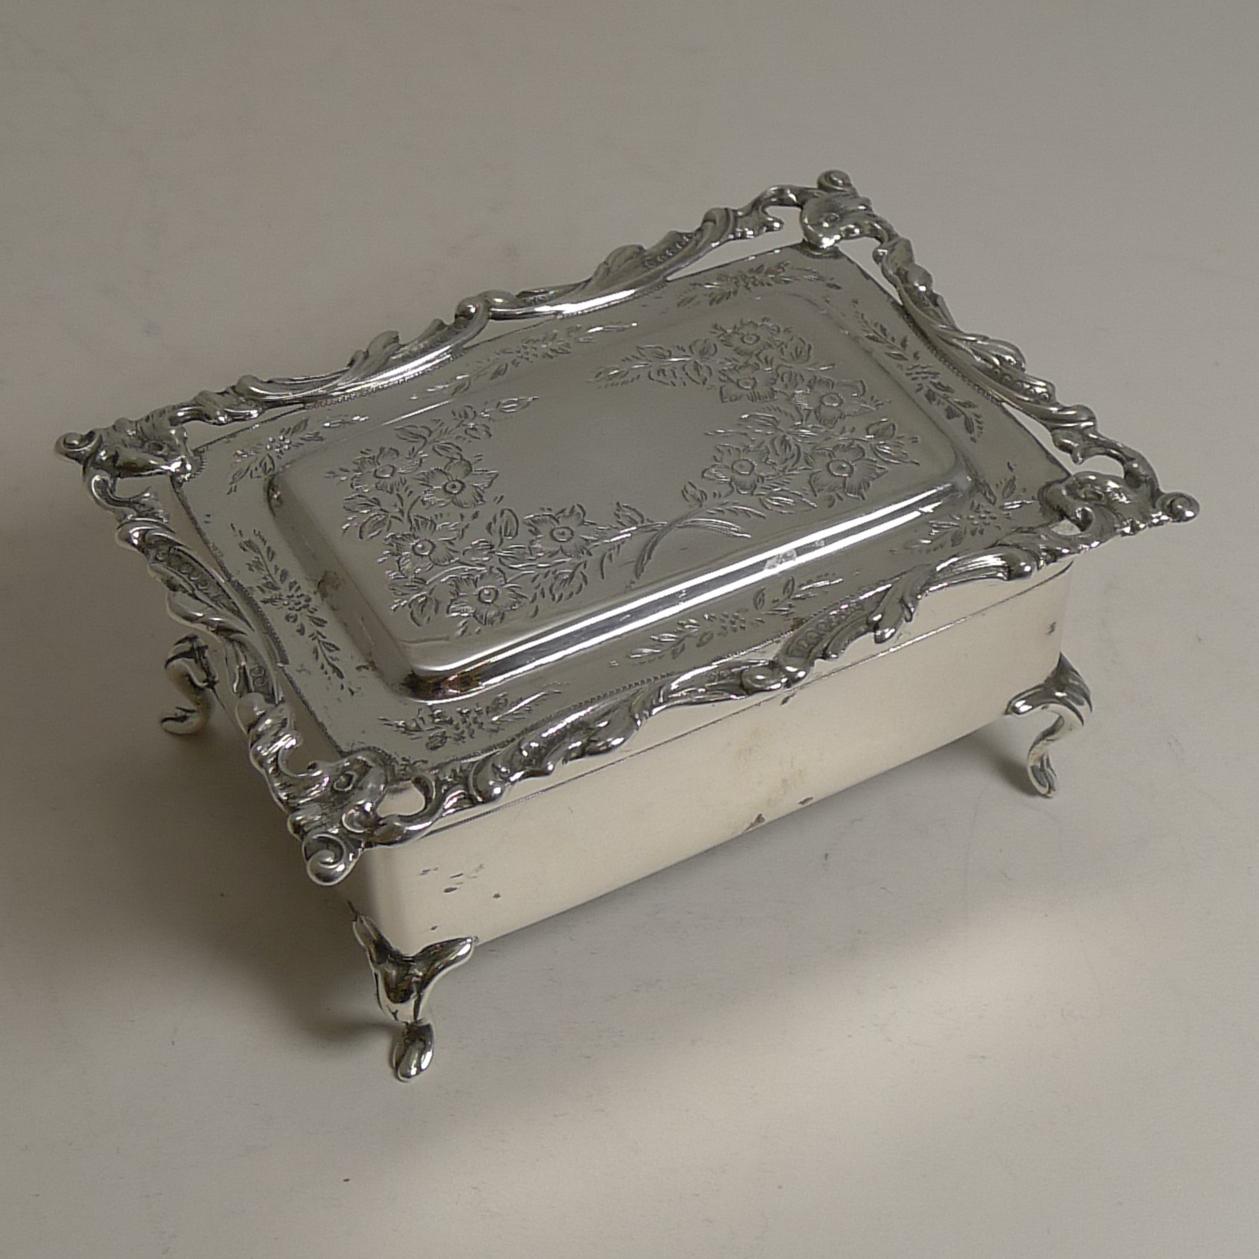 A stunning antique English sterling silver jewelry box standing on four very elegant legs.

The hinged lid is engraved with two sprays of floral and foliate bouquets creating a vacant cartouche to the centre. The border of the lid is made with a